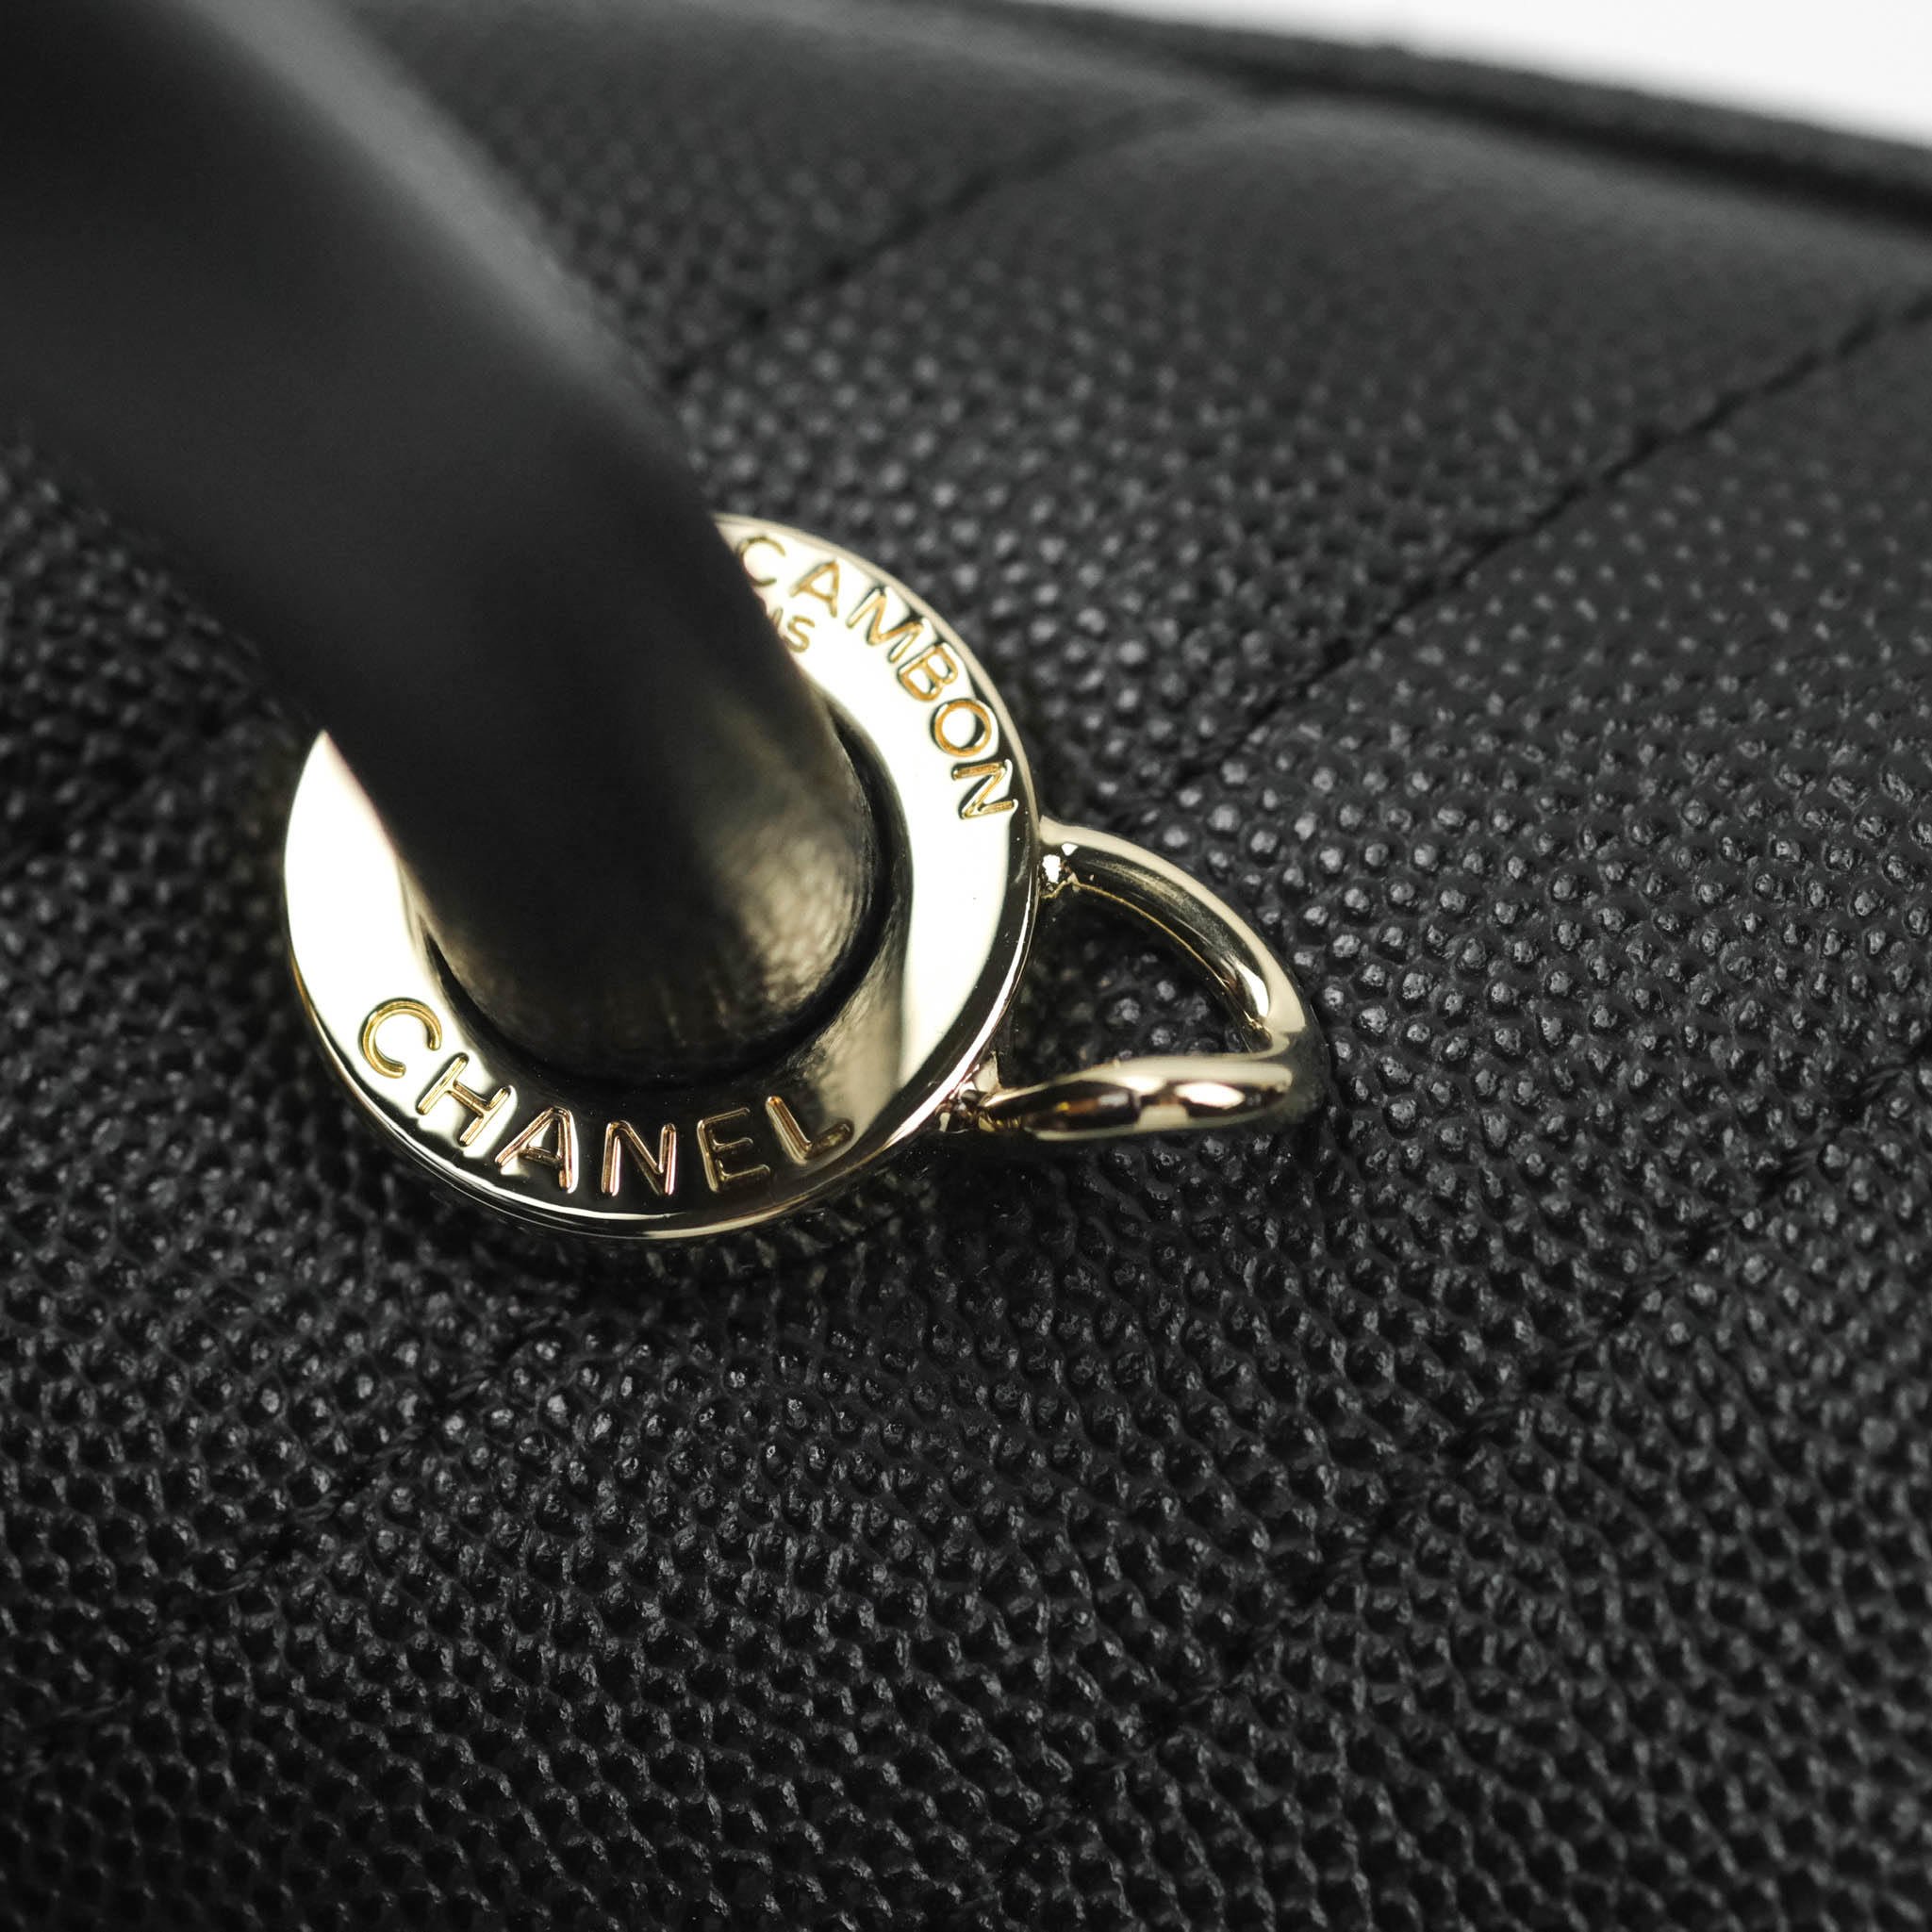 CARTIER VINTAGE TRINITY BAG, black leather with three iconic round